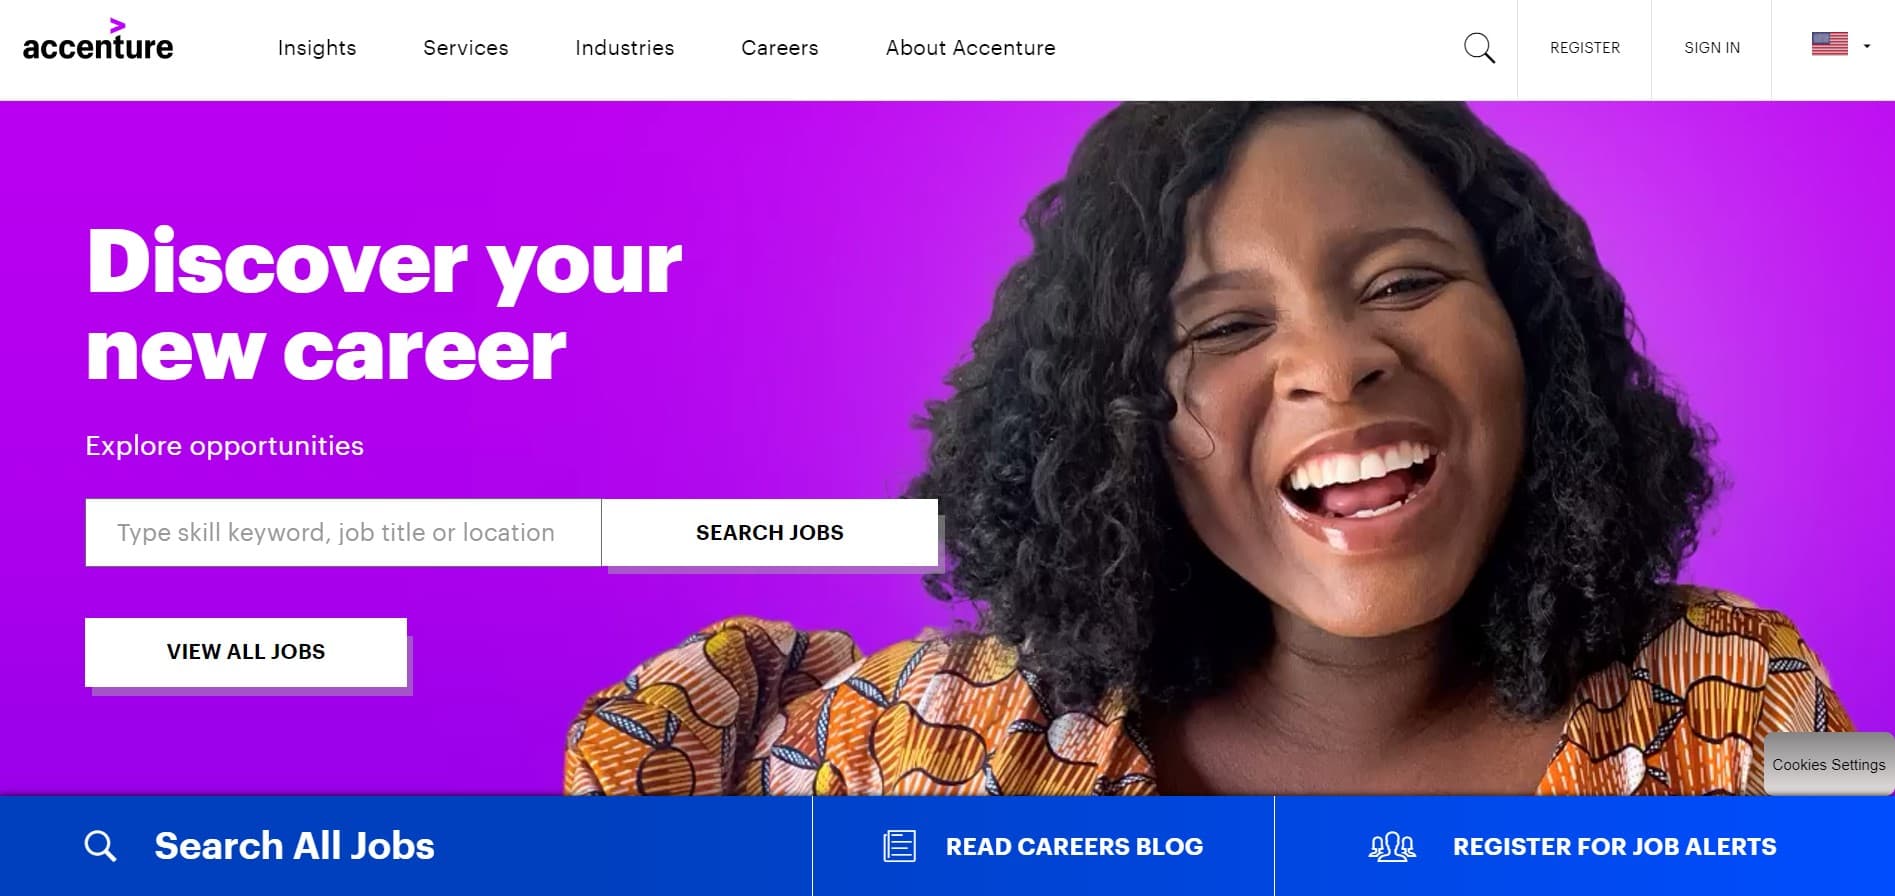 accenture company career page